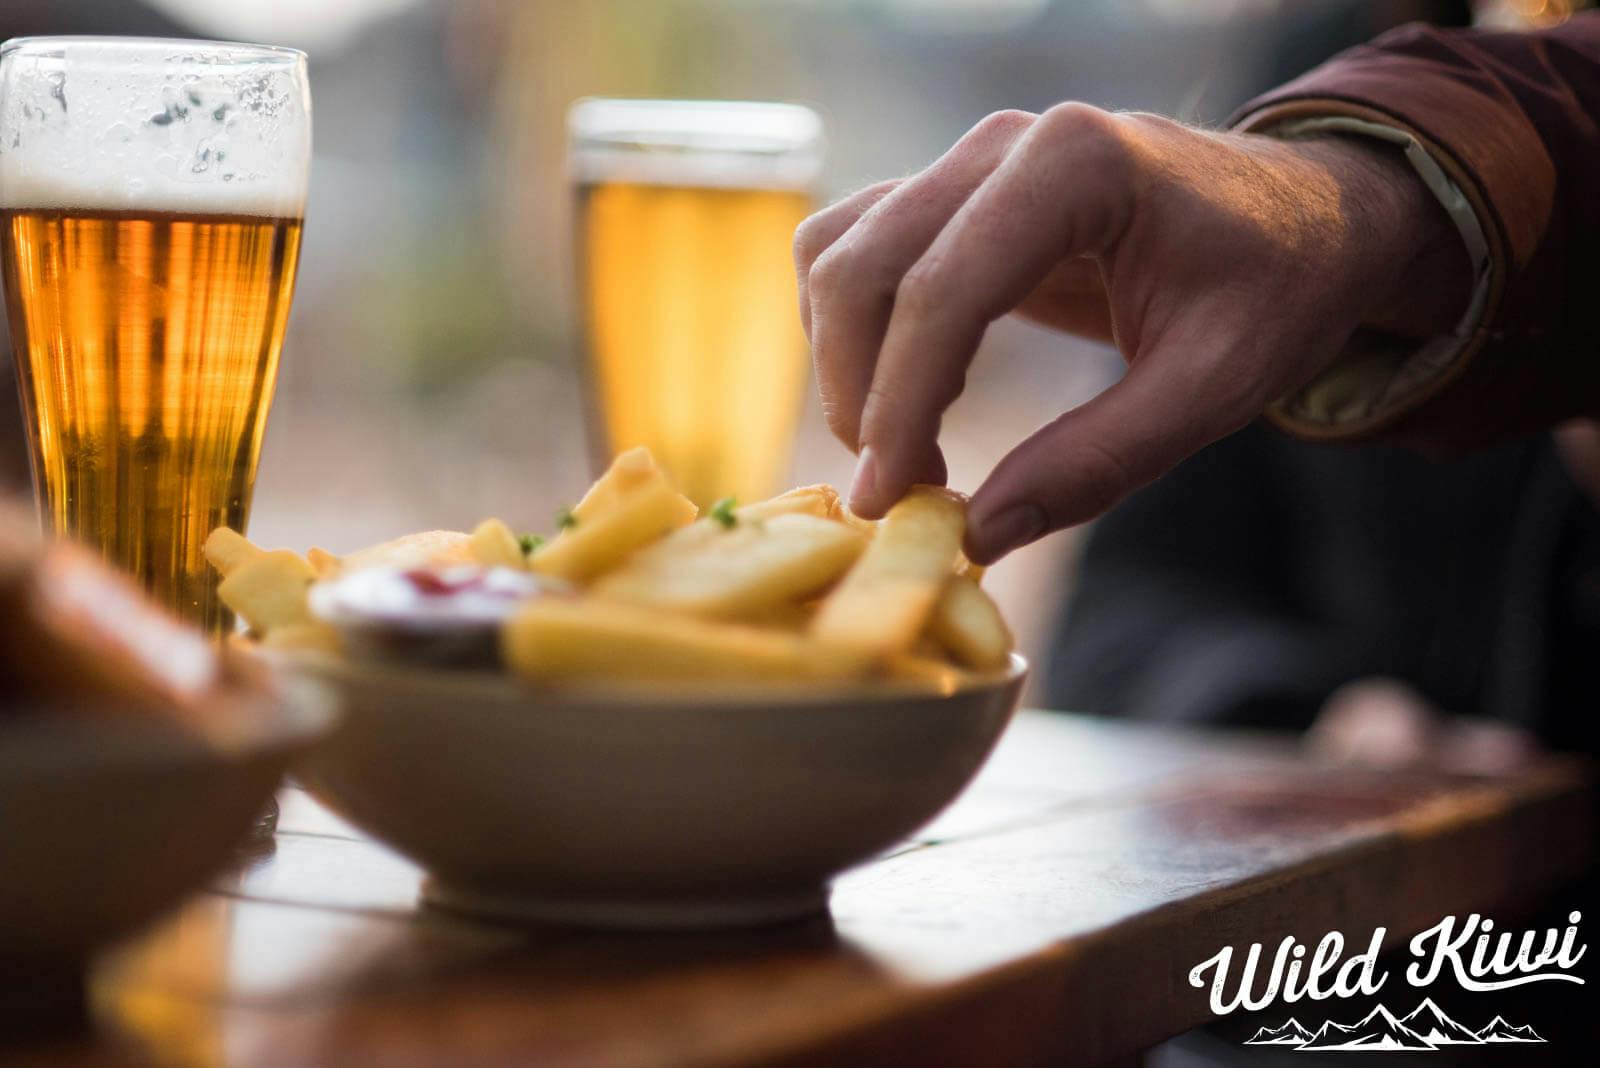 Get stuck into some NZ grub - Share top bar snacks with friends